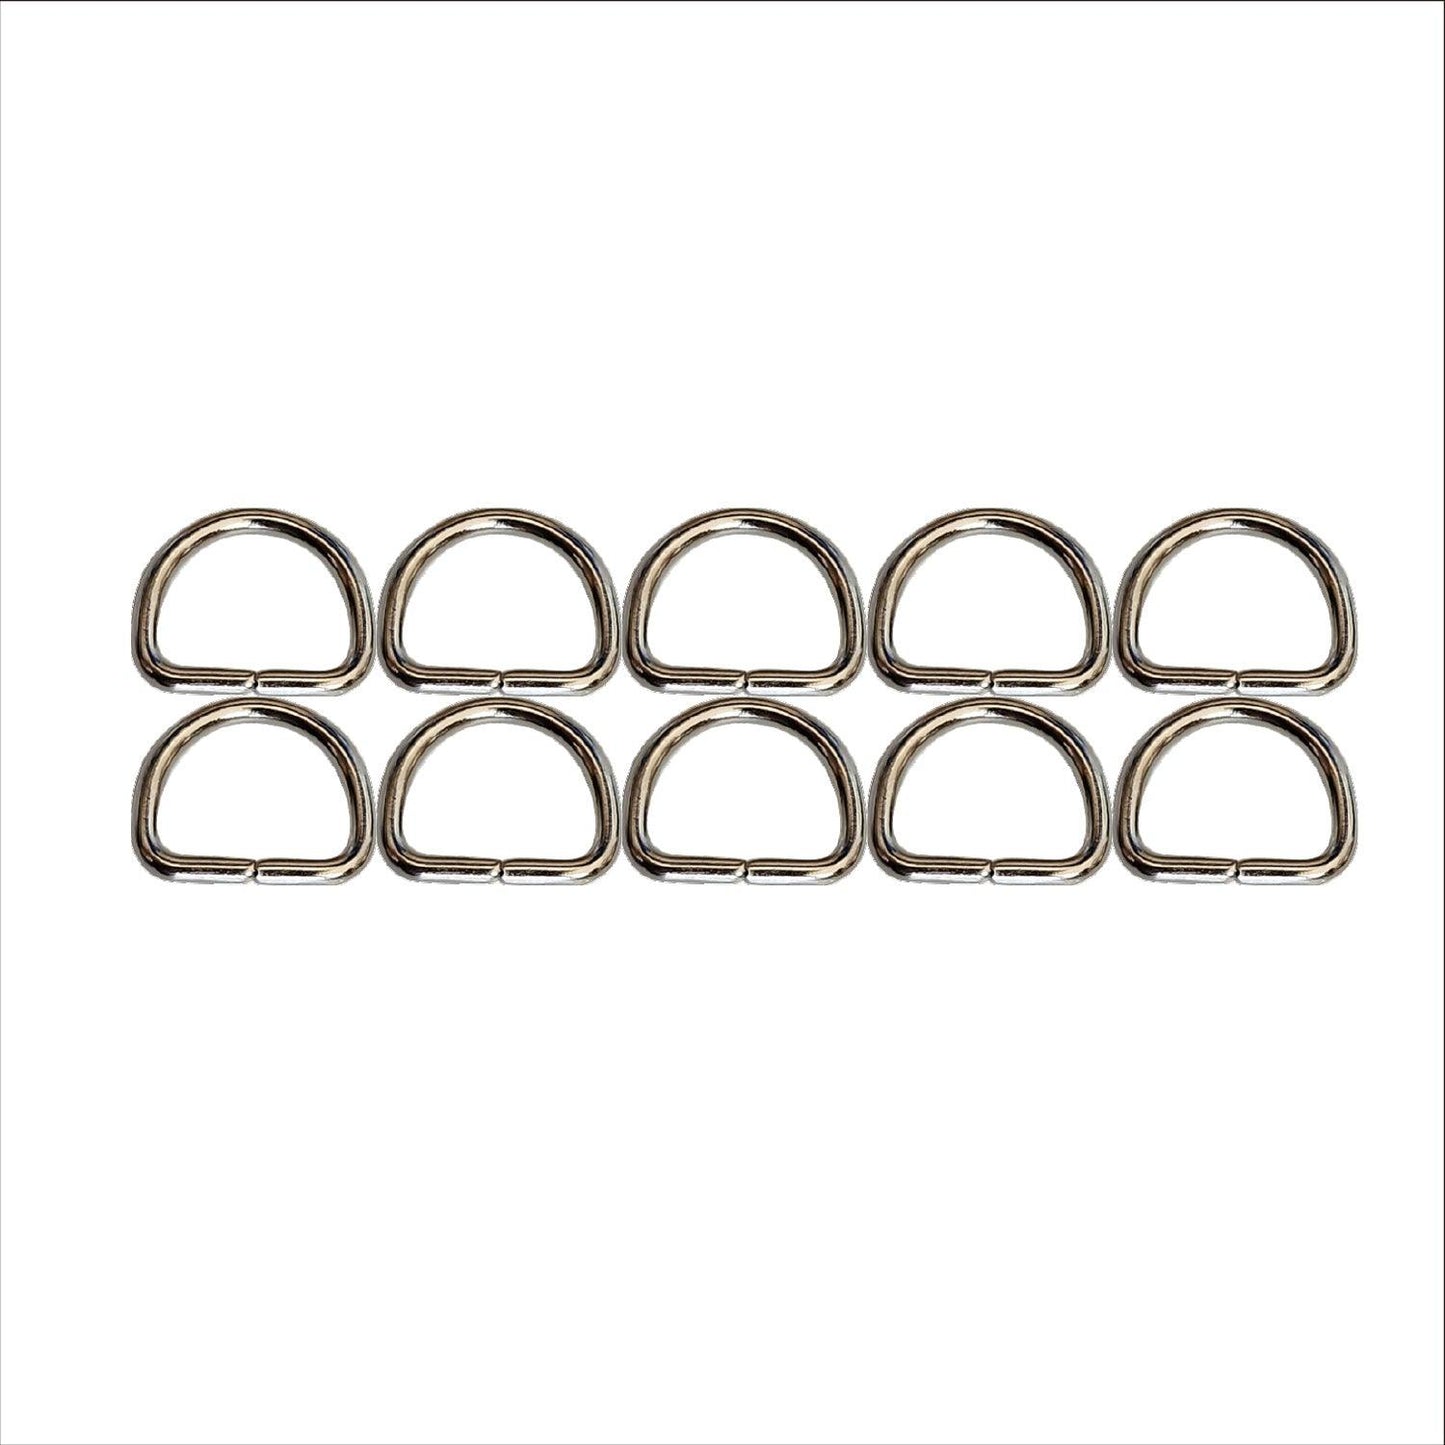 Dee Rings - 12mm Silver - Cams Cords